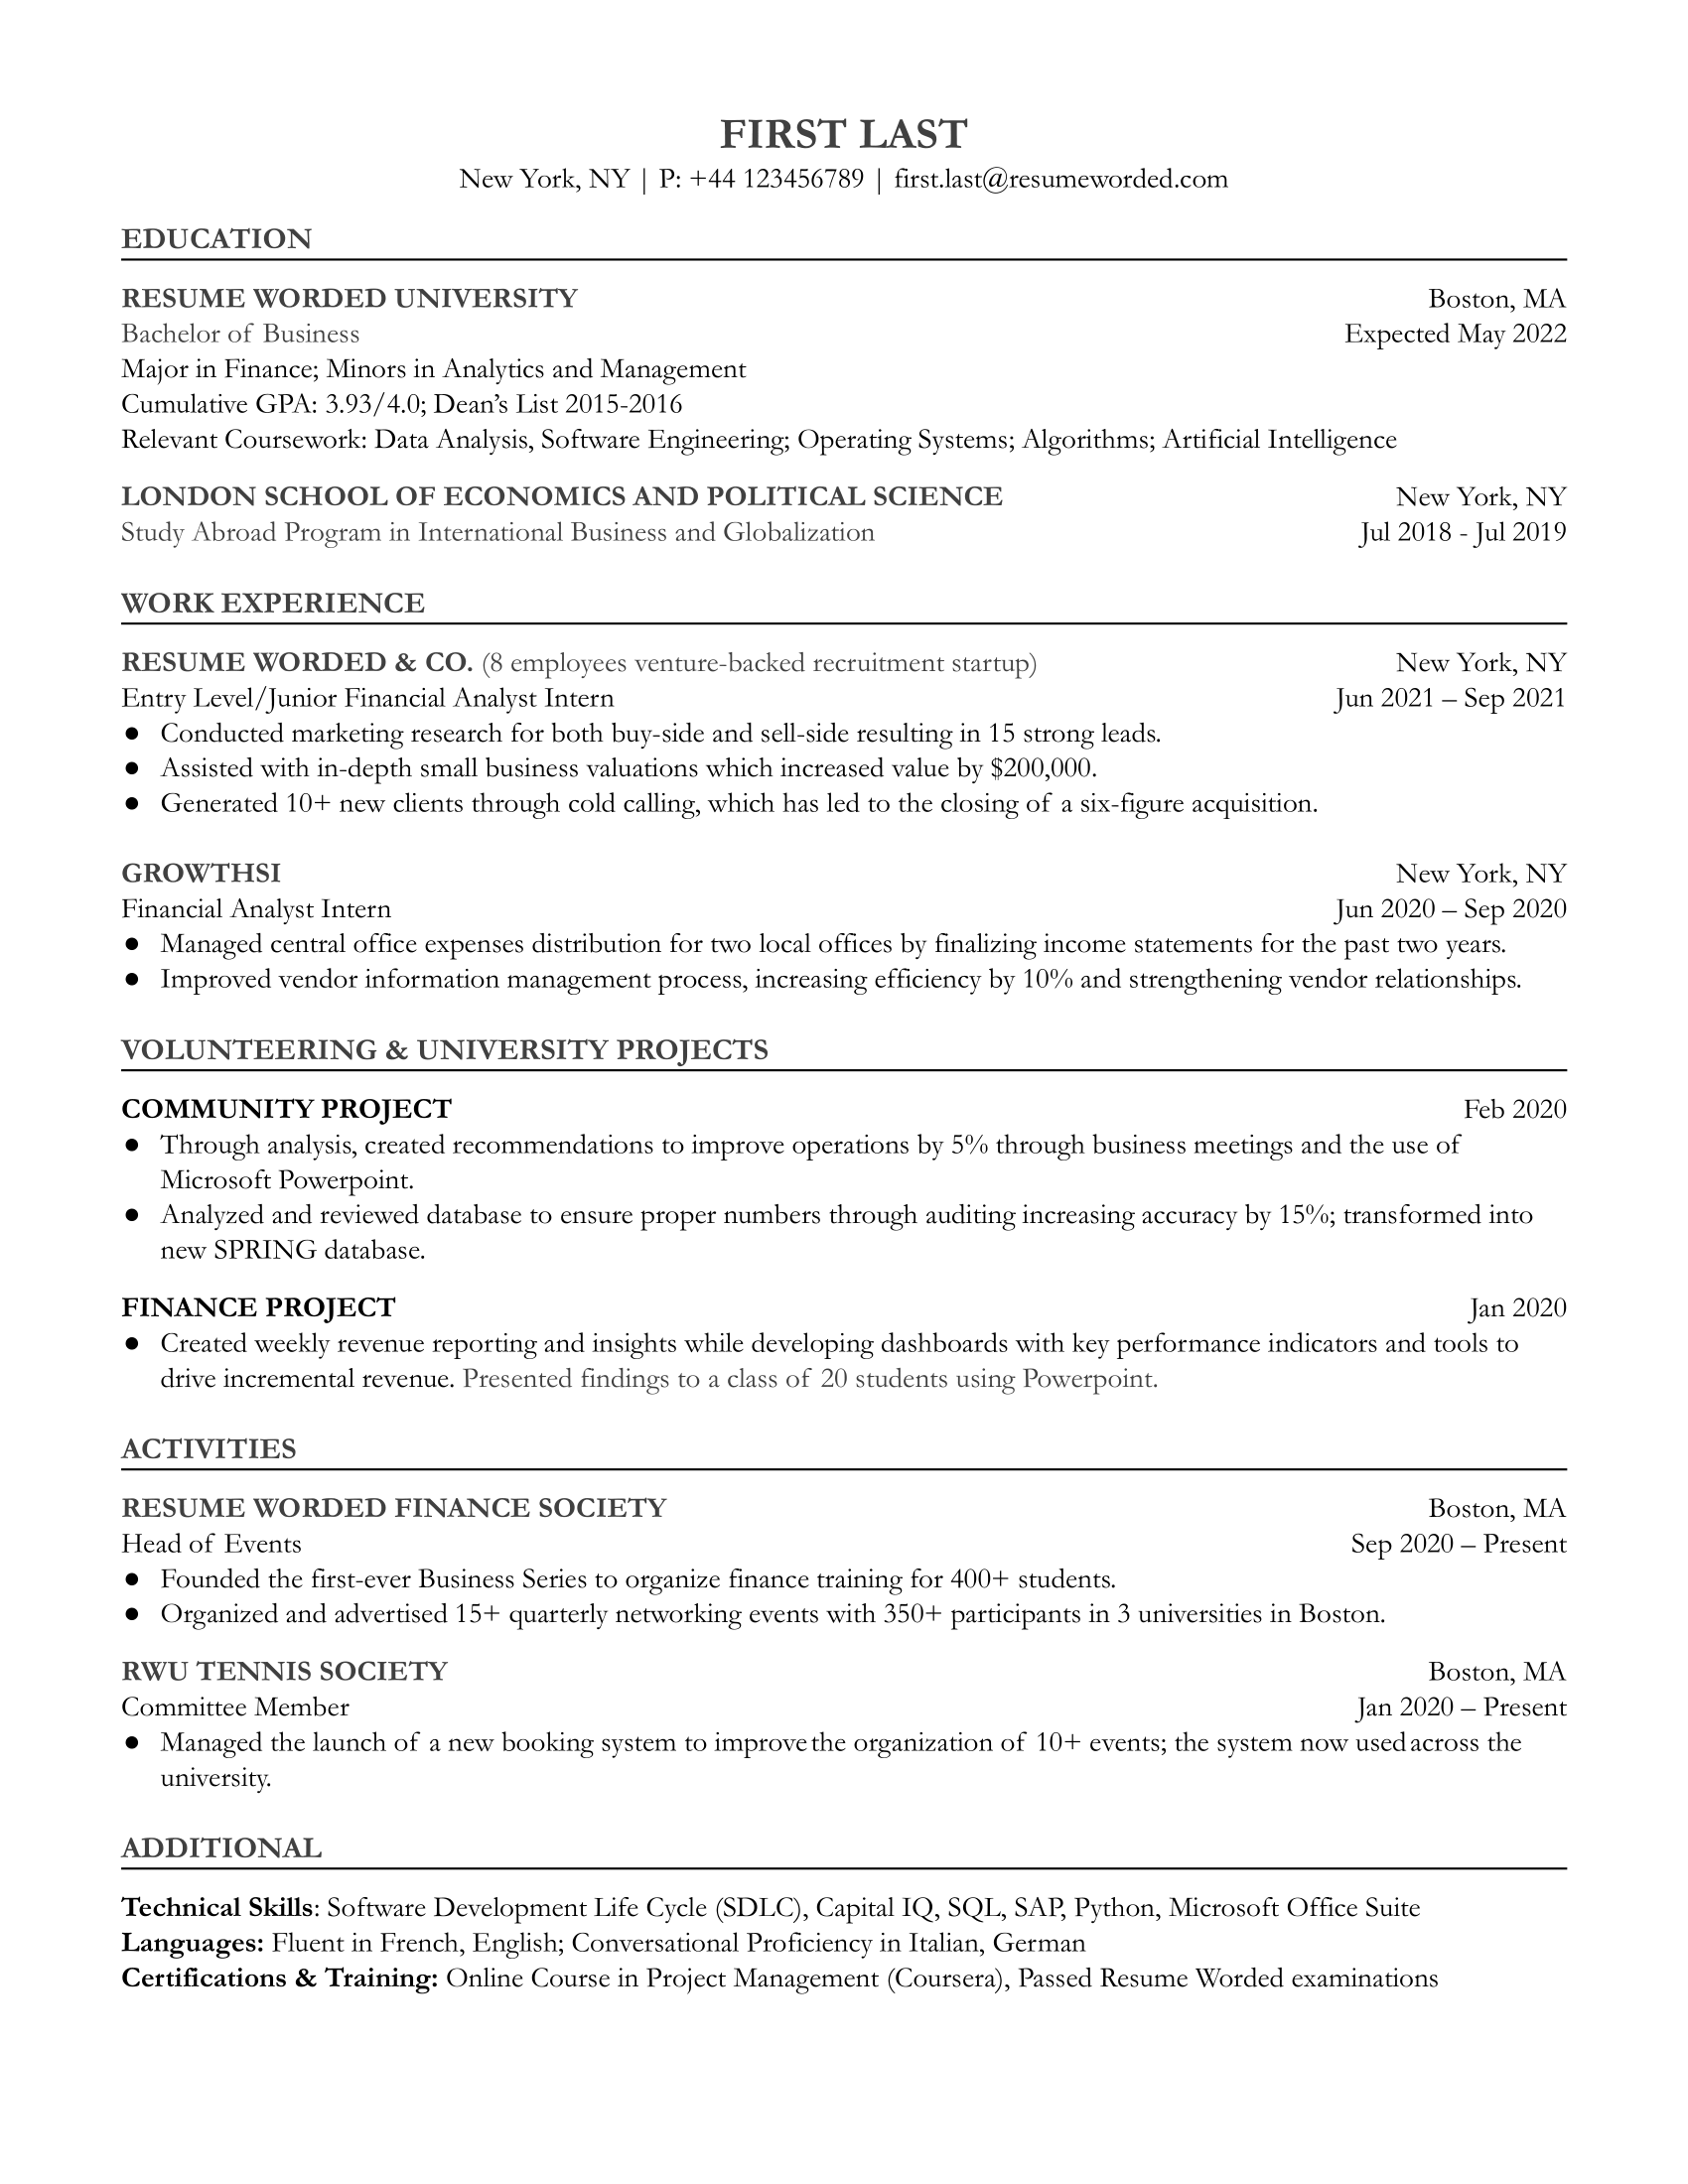 resume for entry level financial analyst